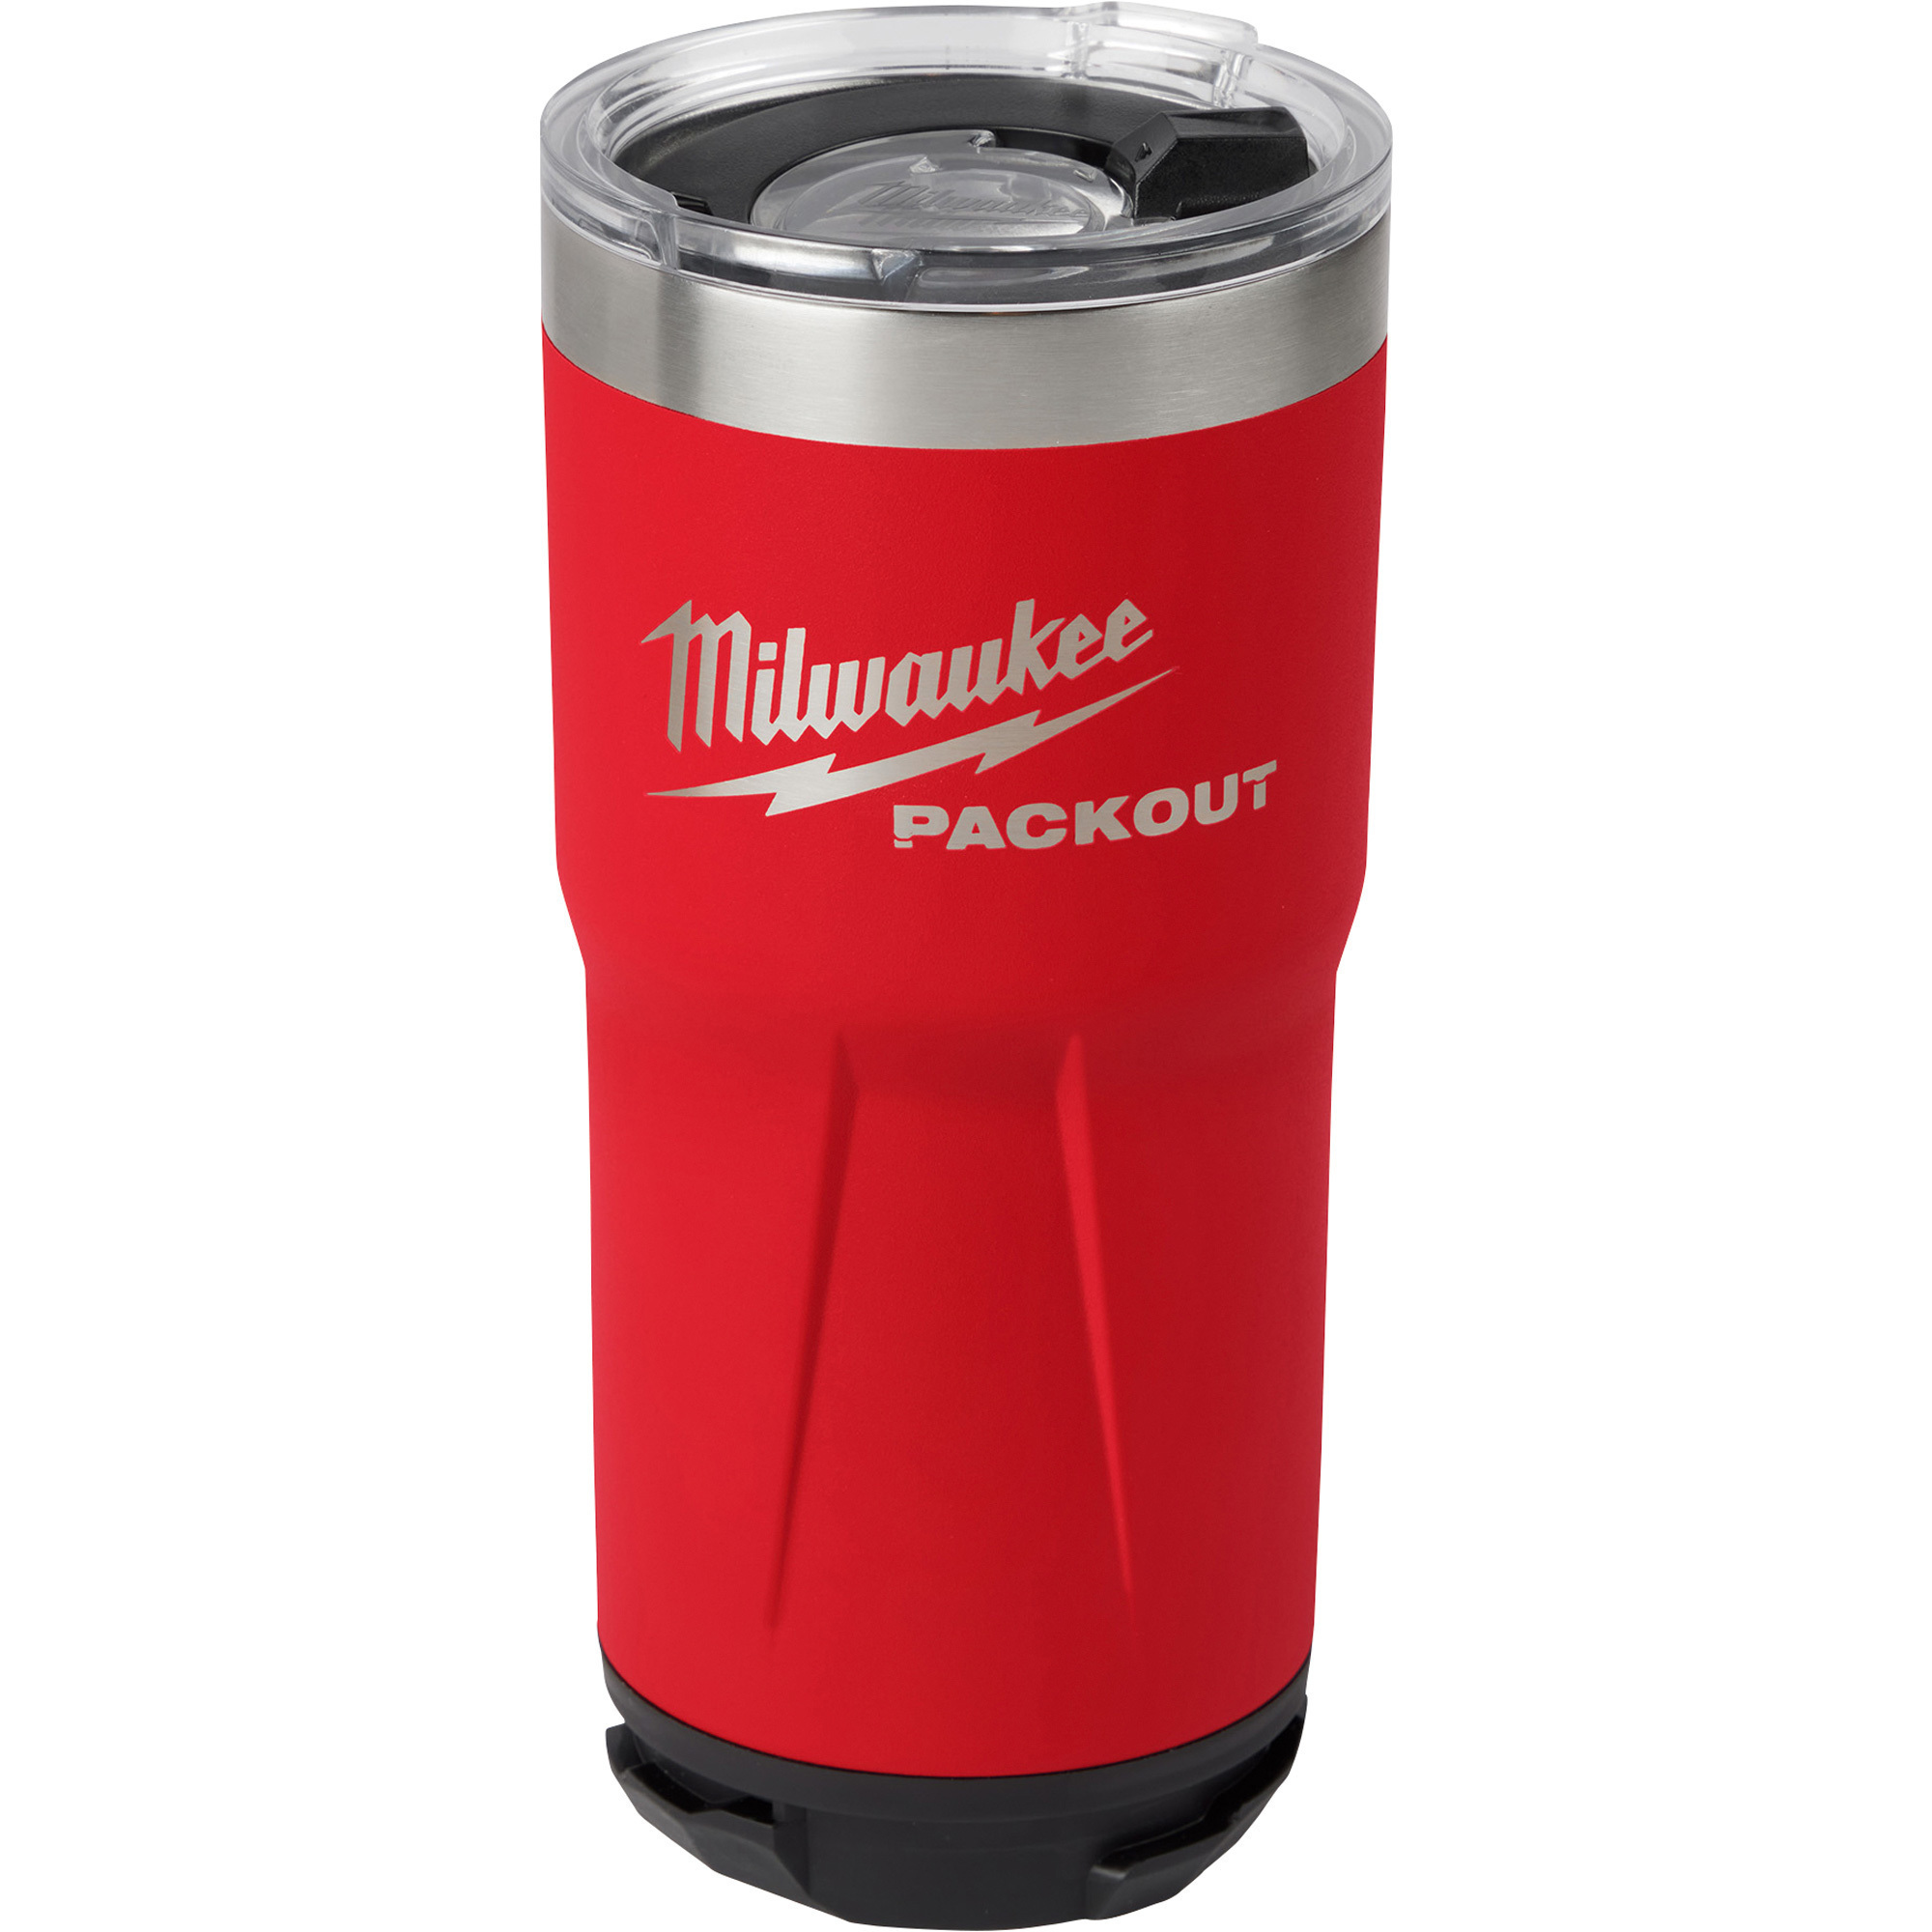 Milwaukee Packout 20-Oz. Tumbler, Red, Model 48-22-8392R